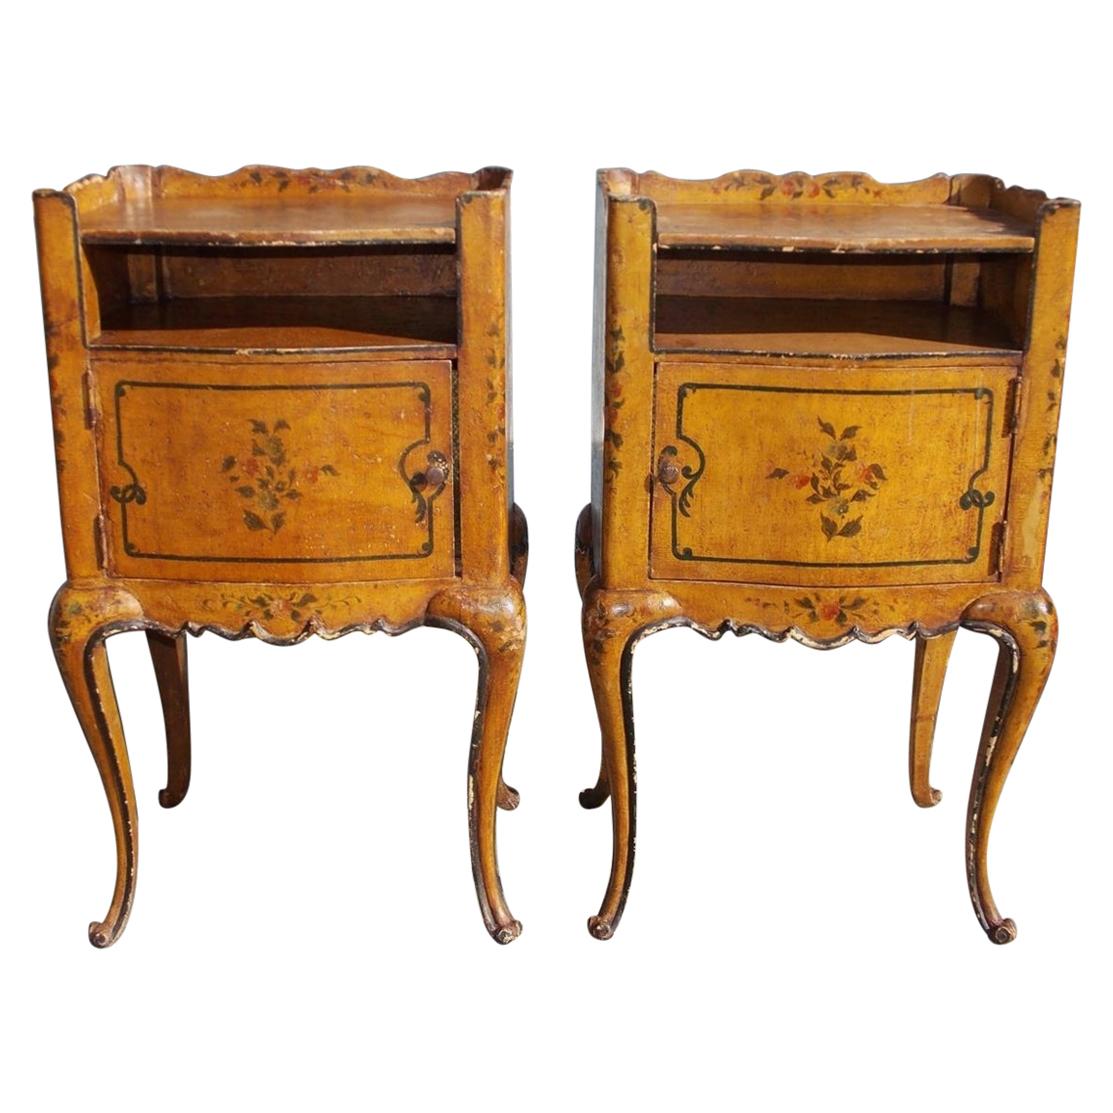 Pair of French Painted Petite Commodes with Opposing Cabinet Doors, Circa 1880